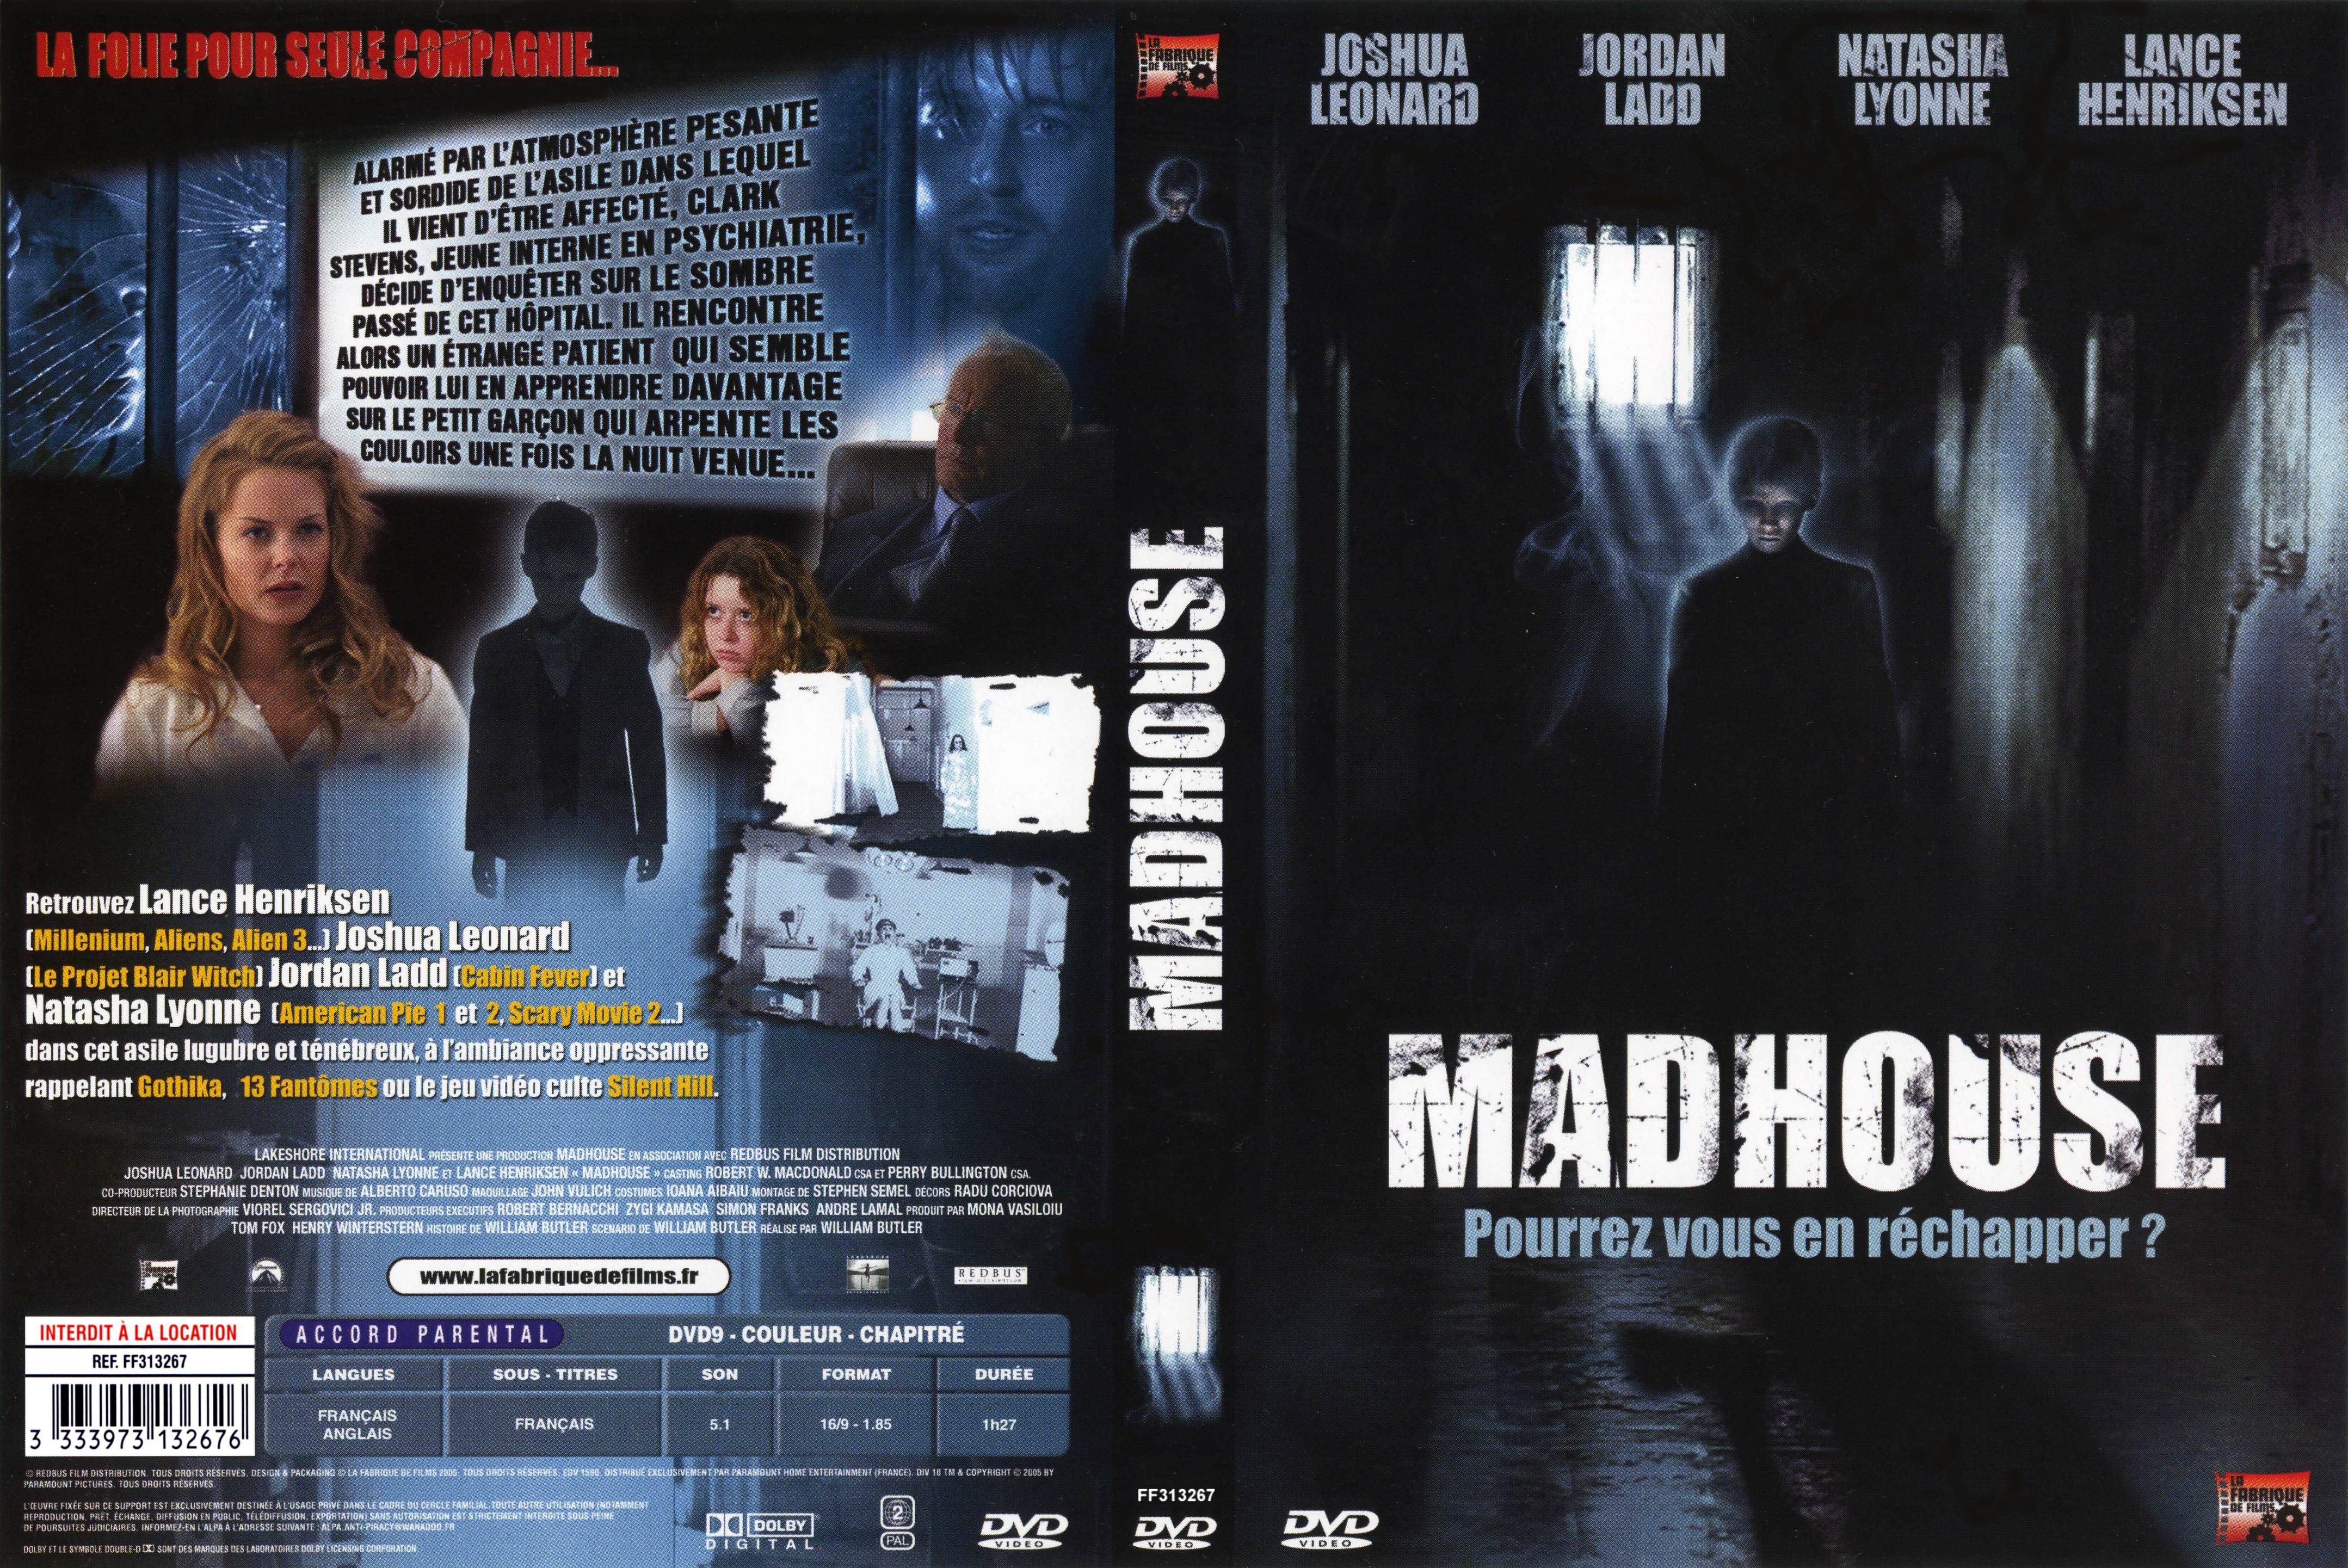 Jaquette DVD Madhouse